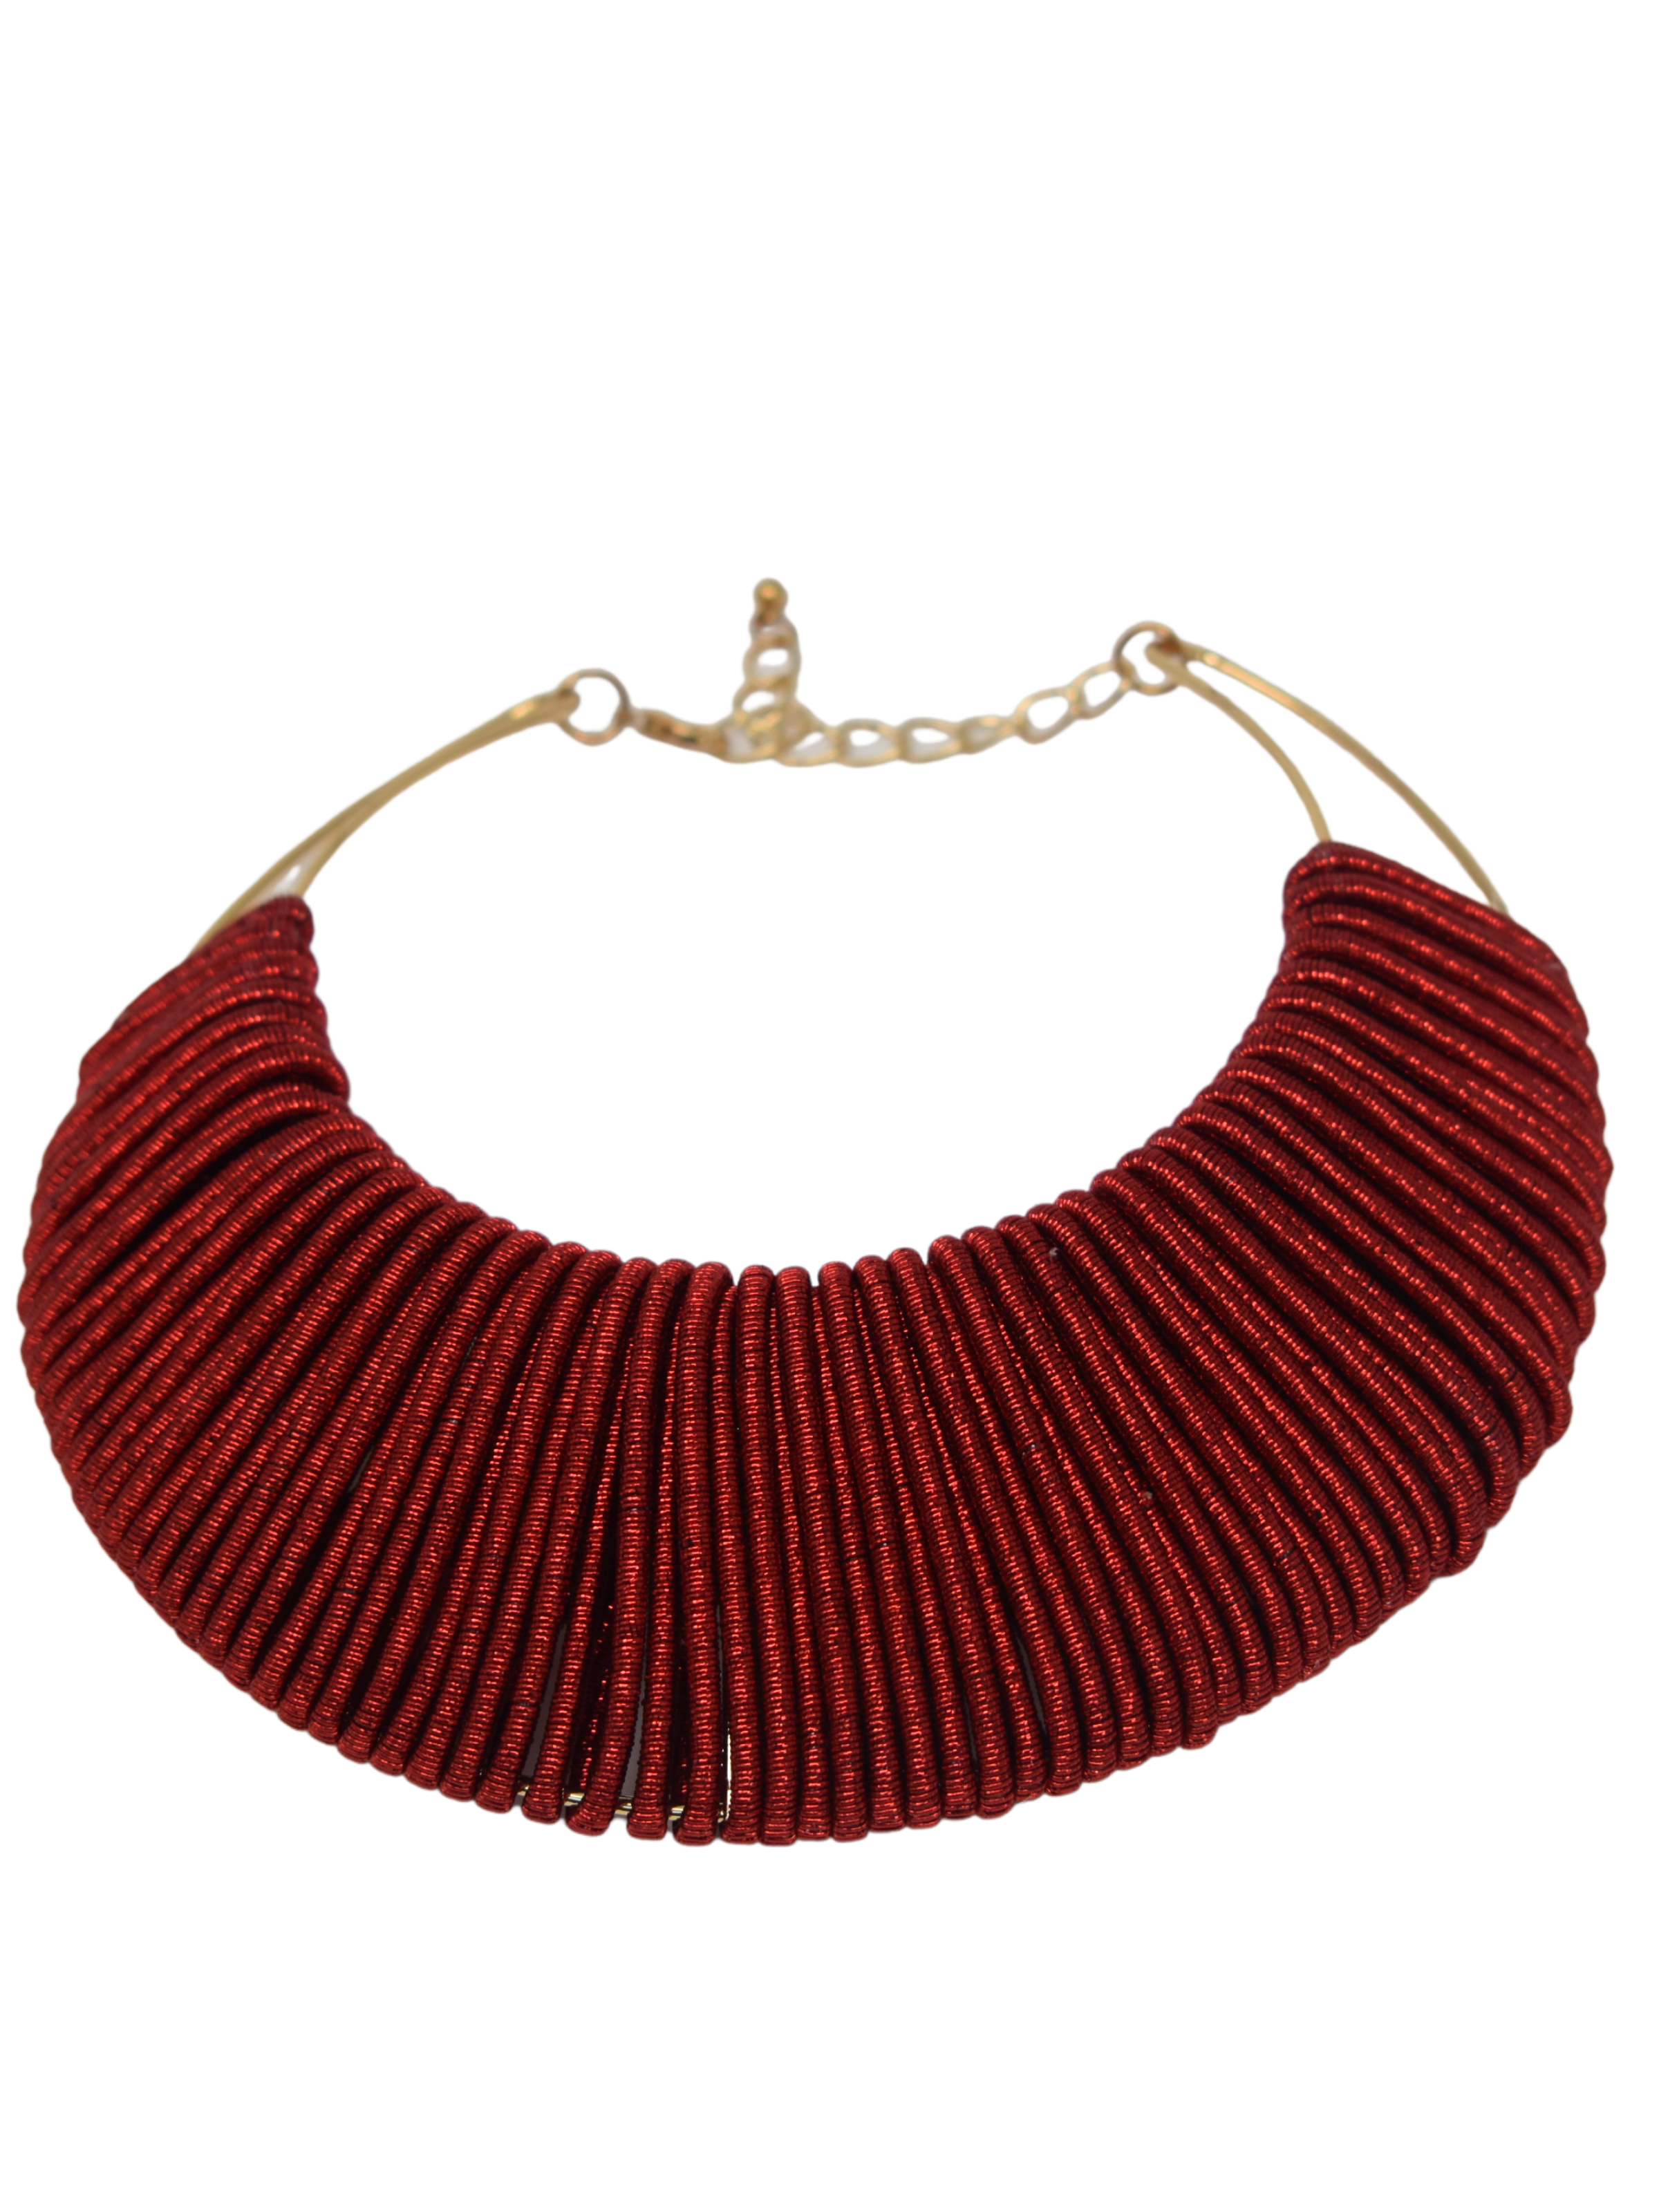 Distinctively cute our Hazel choker bib style Necklace will win them over every time. This Bib style necklace has gold tone and is wrapped in red glitzy rope to form a beautiful design.